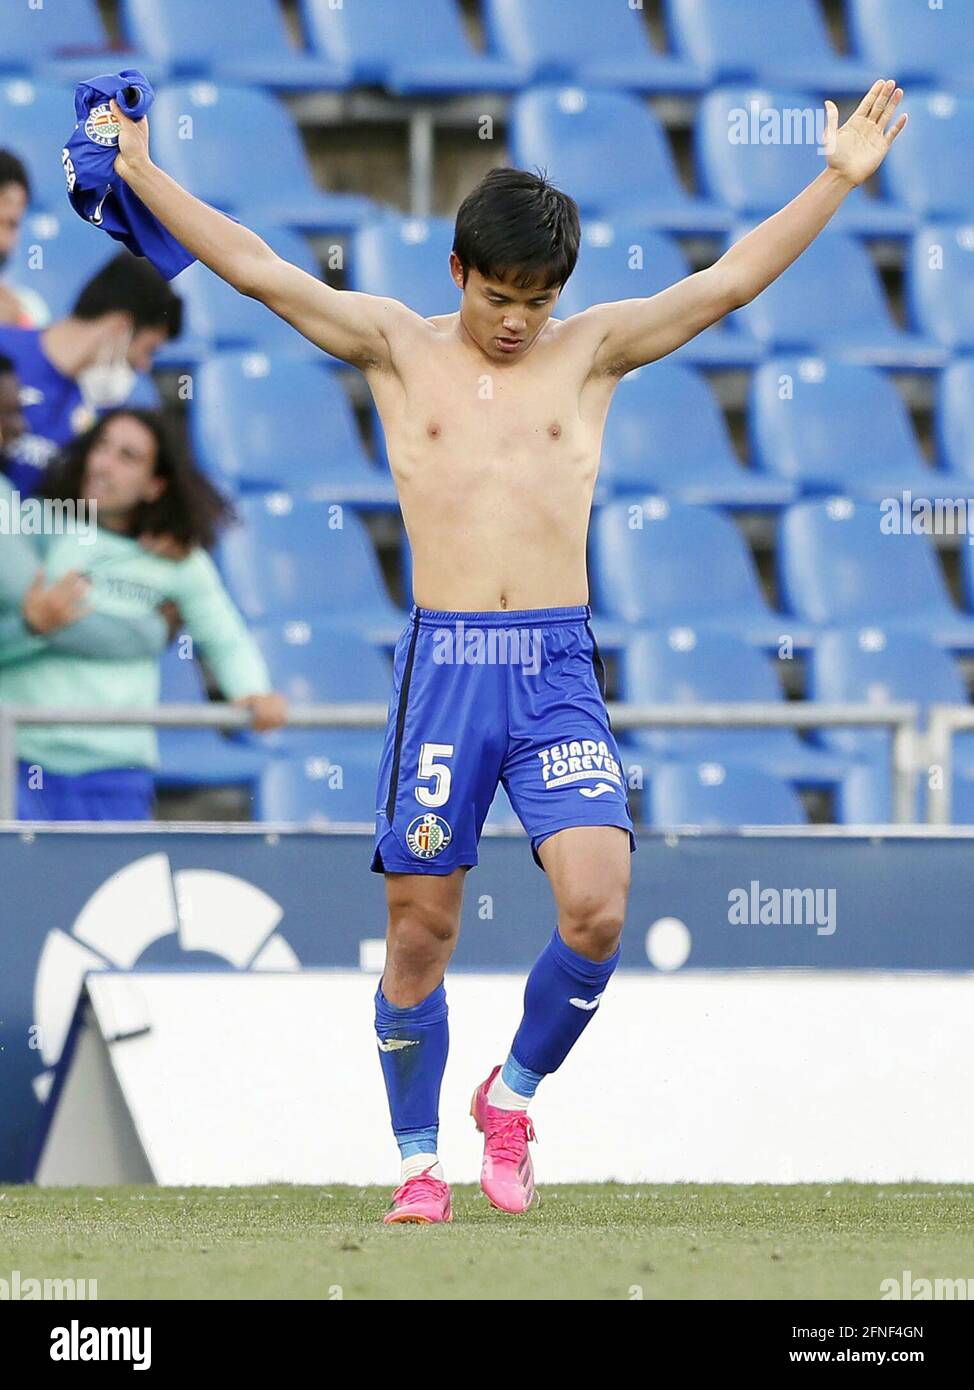 Getafe's Takefusa Kubo takes off his jersey after scoring a goal during the half of La football match against Levante on May 16, 2021, in Getafe, Spain. (Kyodo)==Kyodo Photo